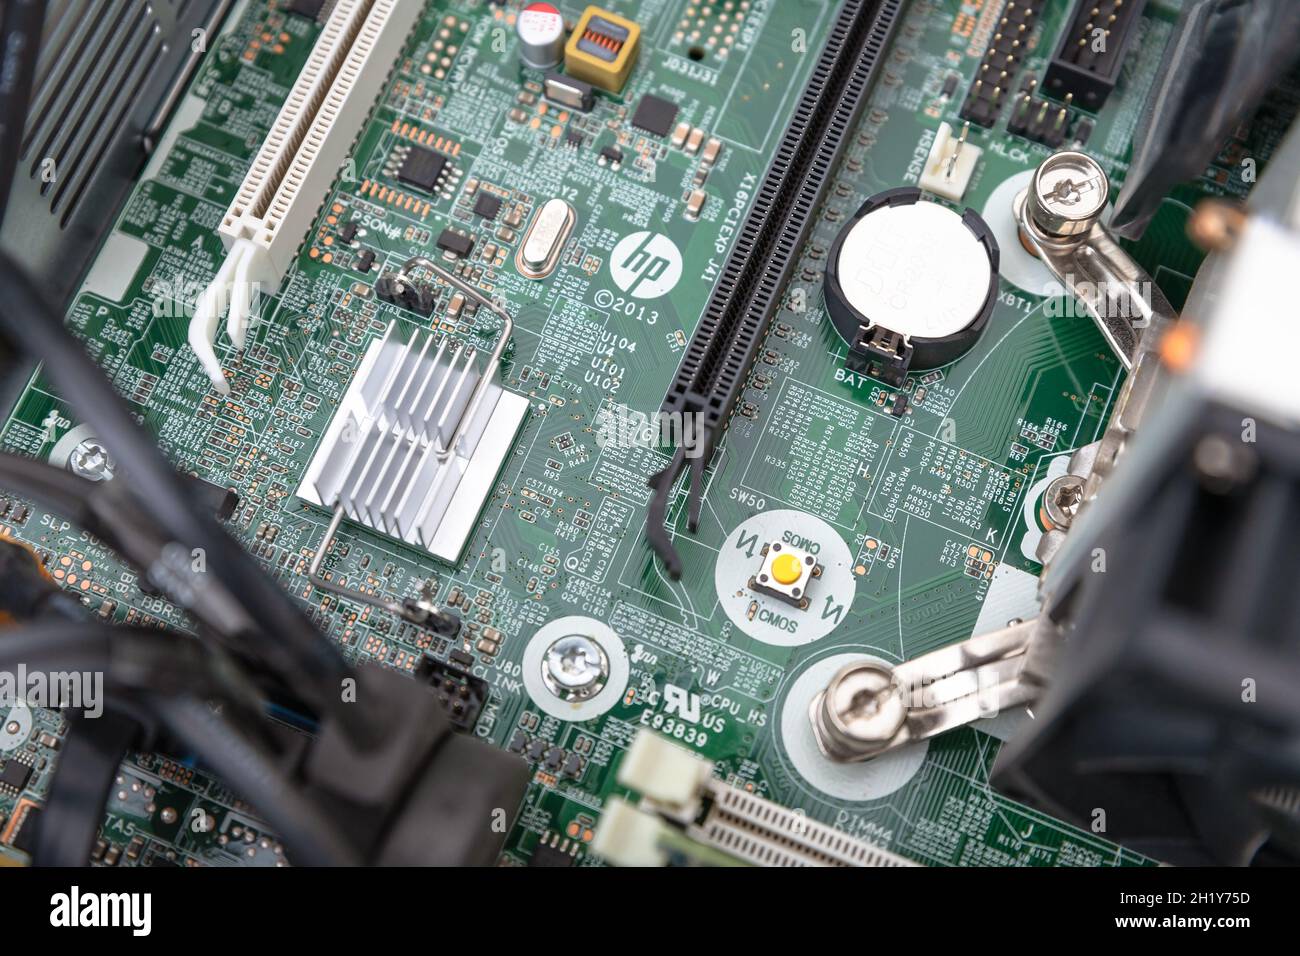 Woodville, Australia - October 15, 2021: Close-up top view of HP motherboard installed in a small factor business desktop Stock Photo